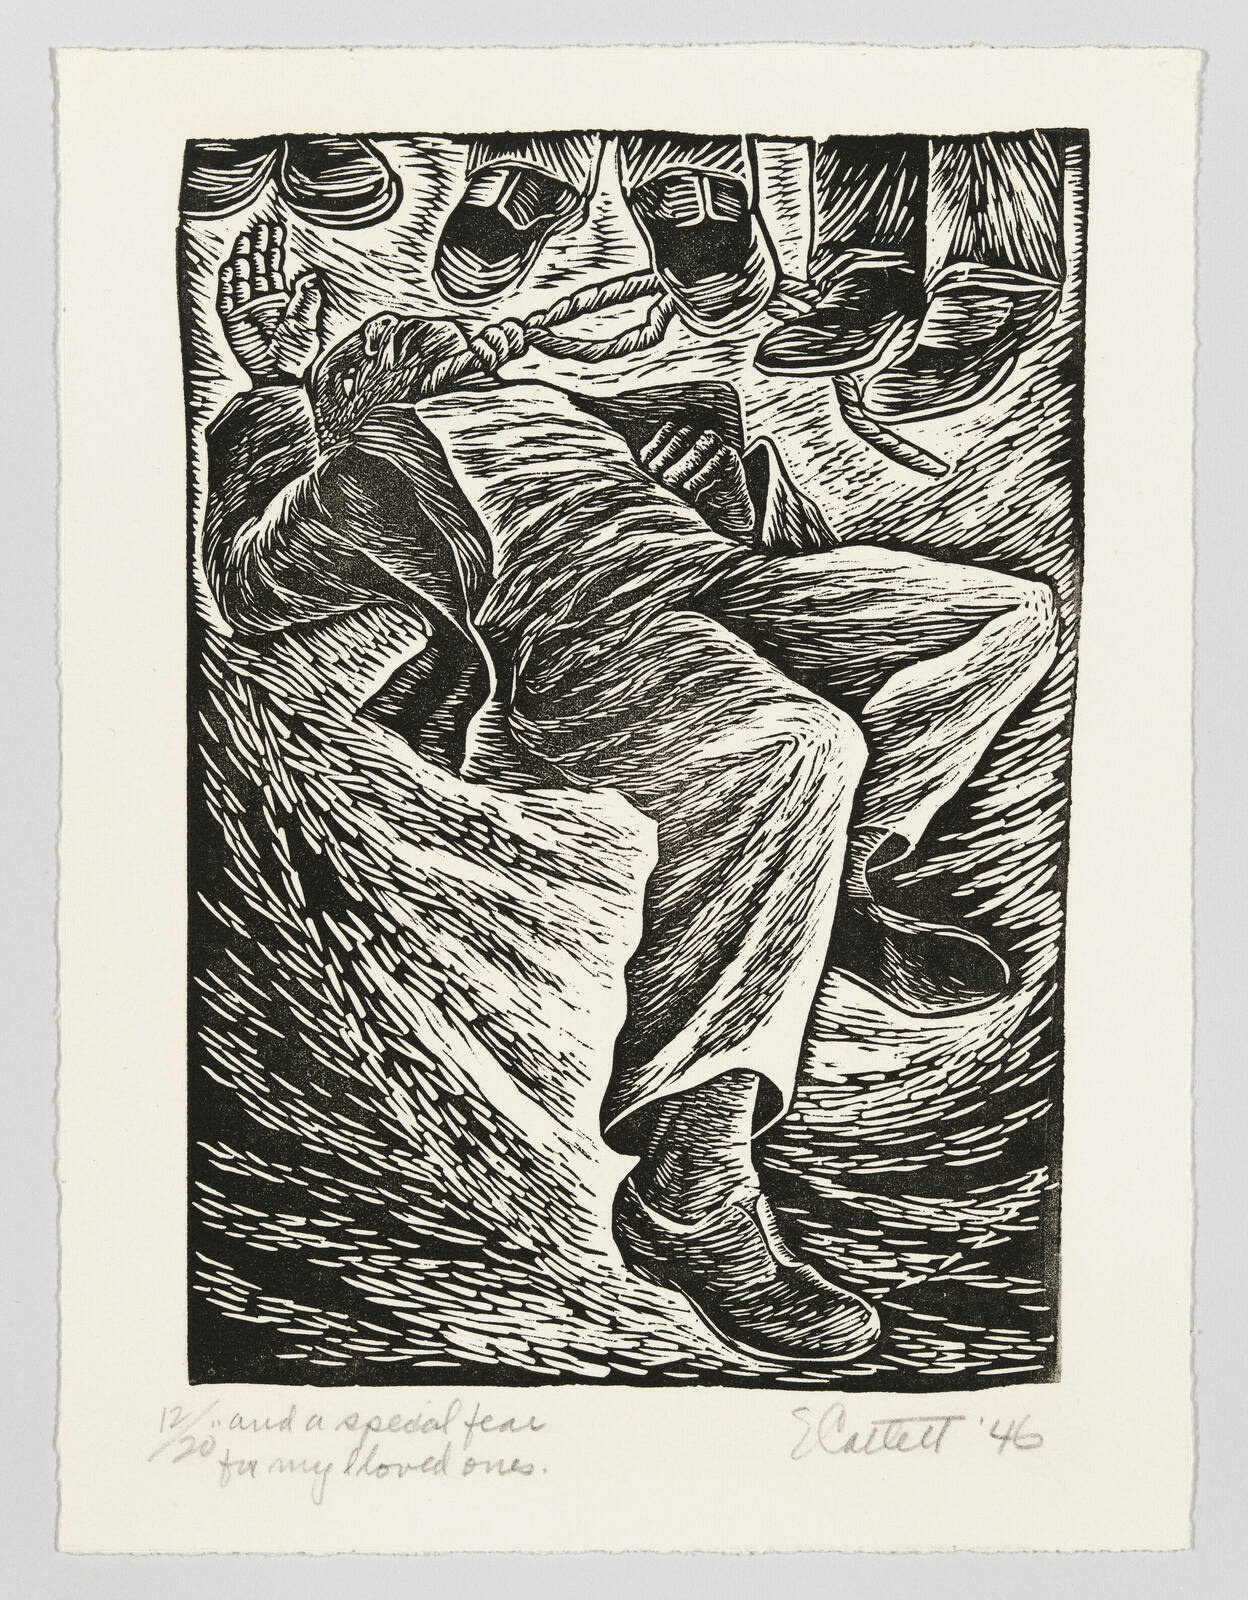 A Black man lies on the ground with a rope around his neck, while the feet of three unseen figures appear at the top of the frame, standing on the rope.